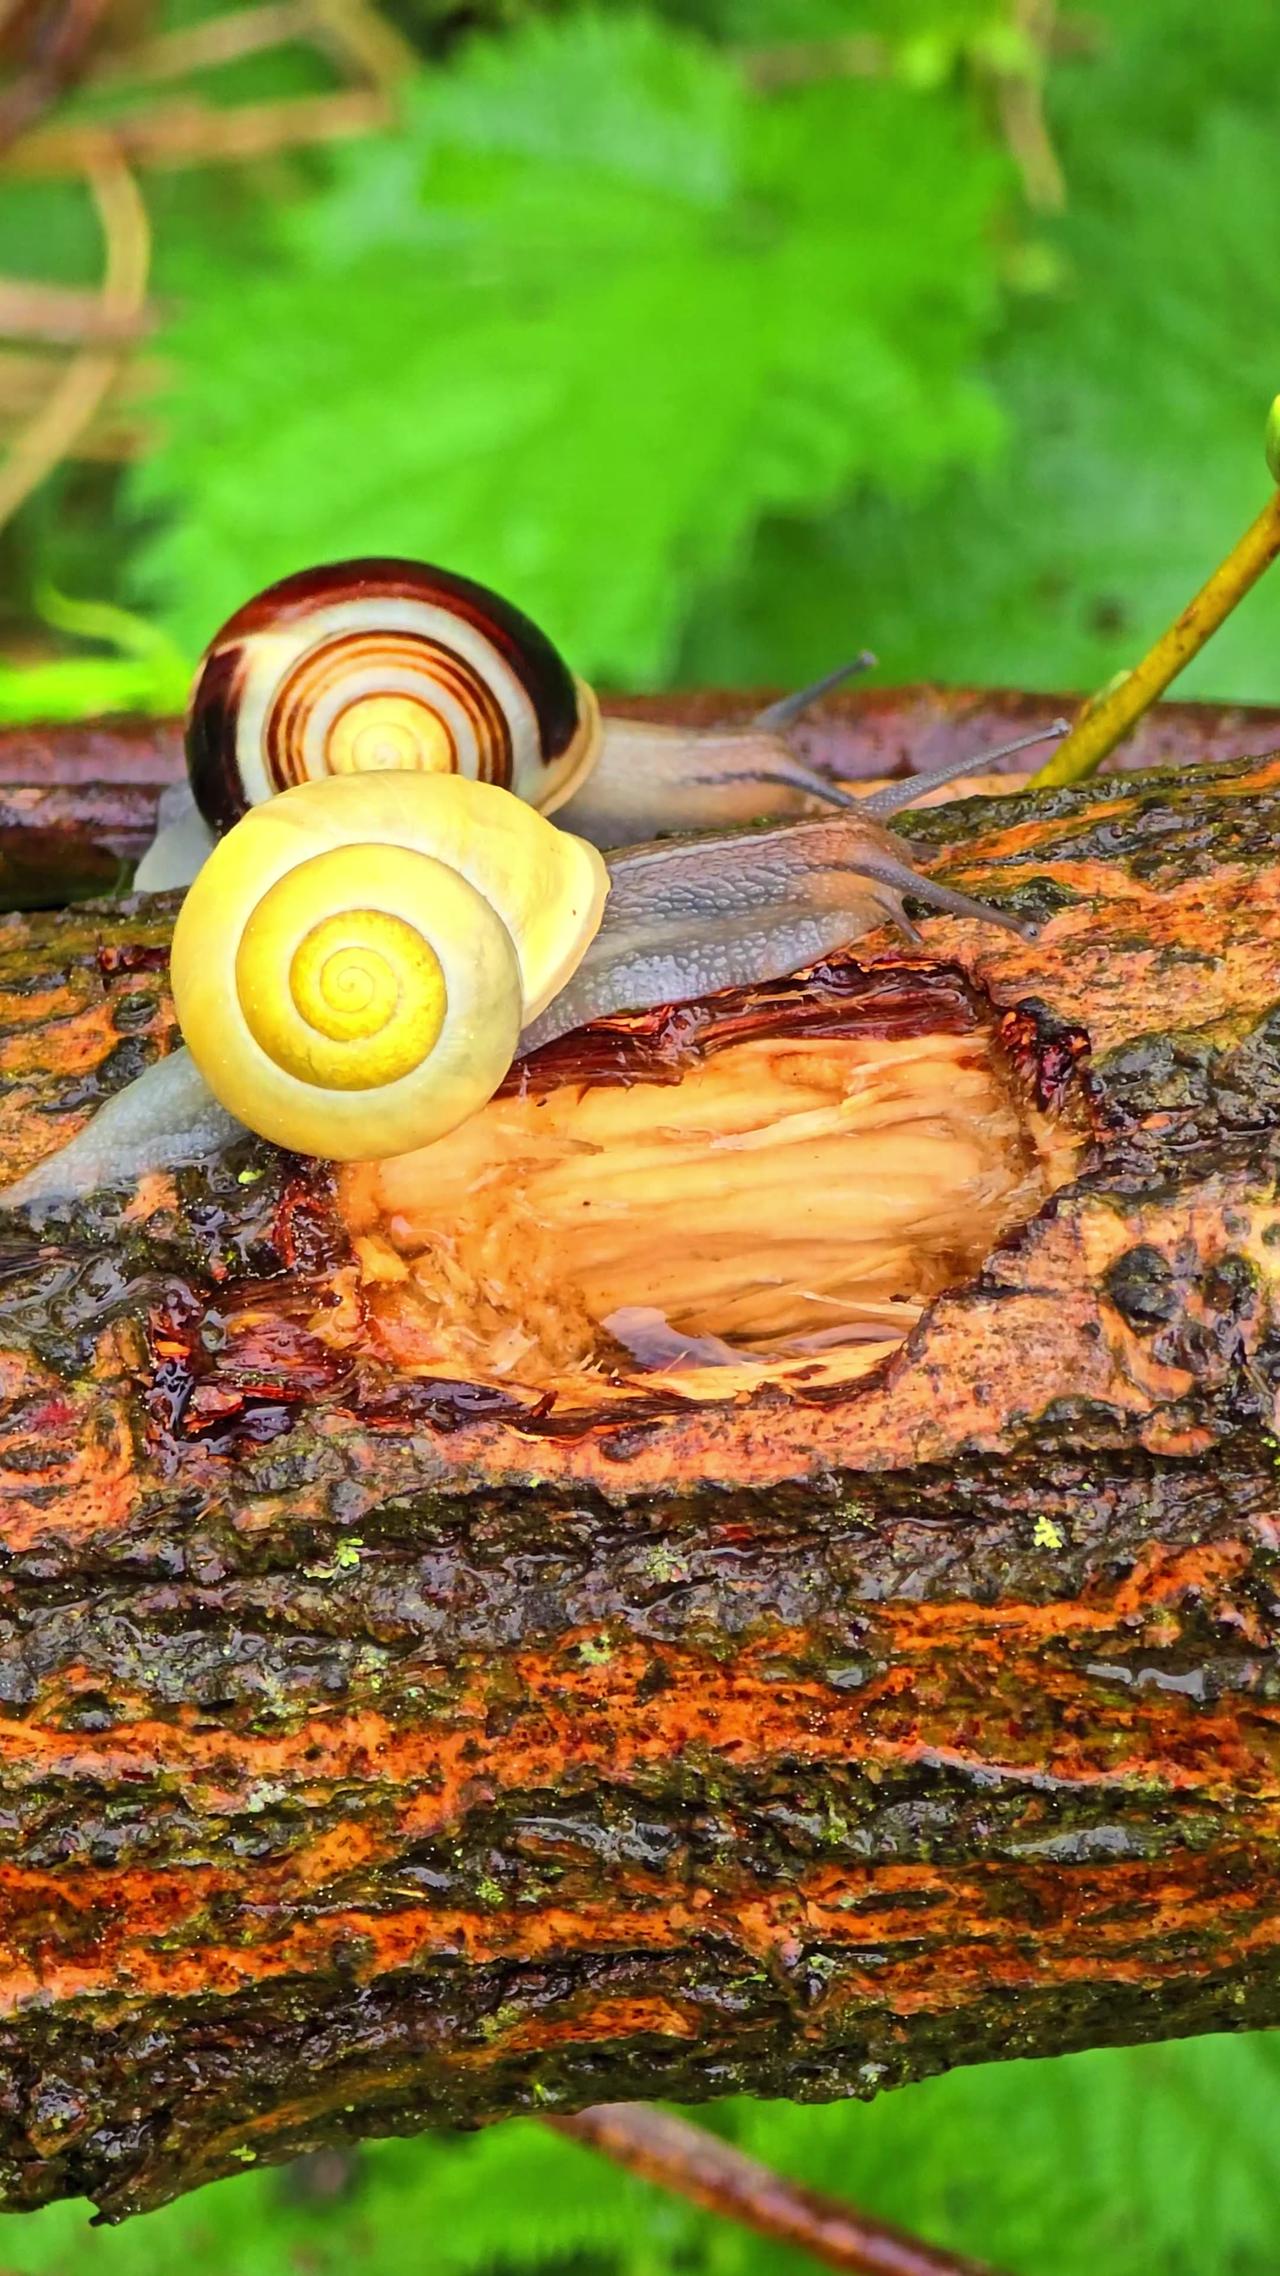 Race between two snails / a light and a dark banded snail.